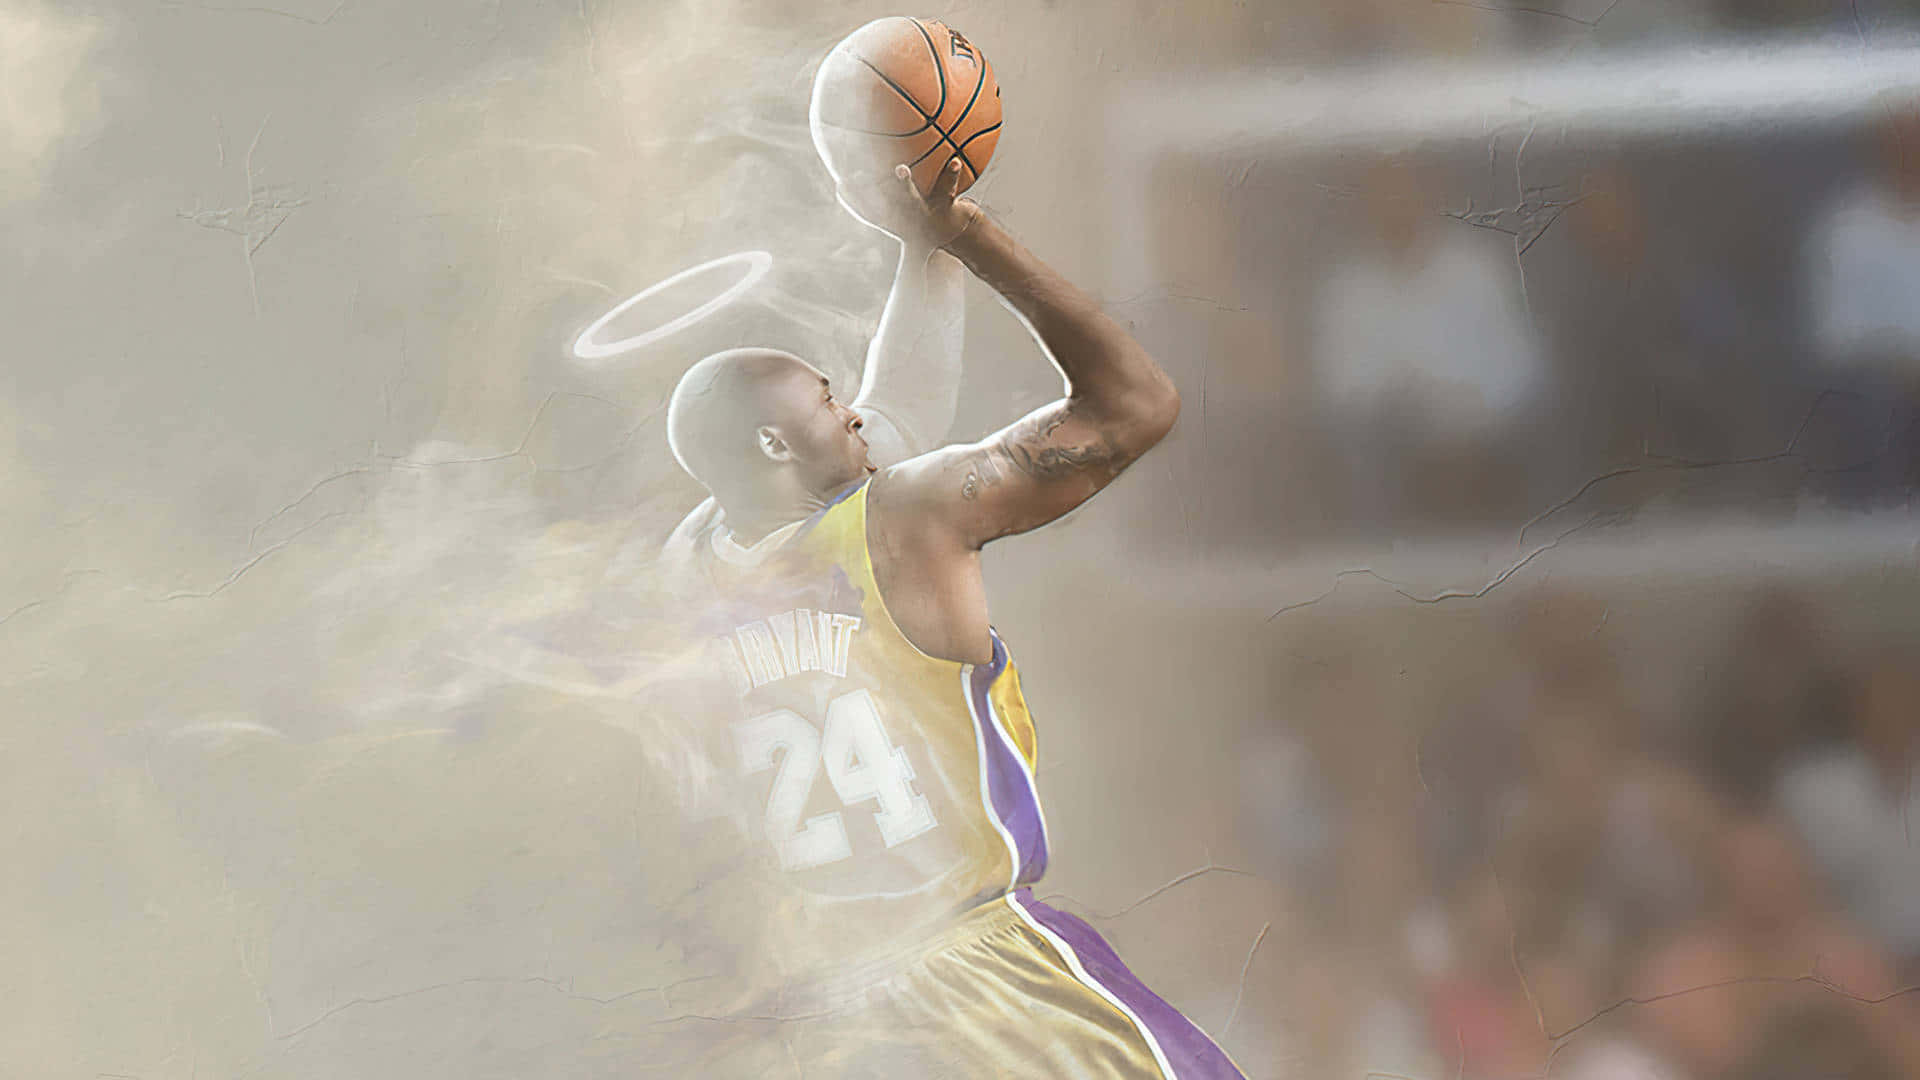 Kobe Bryant symbolically representing how modern technology becomes part of sports Wallpaper